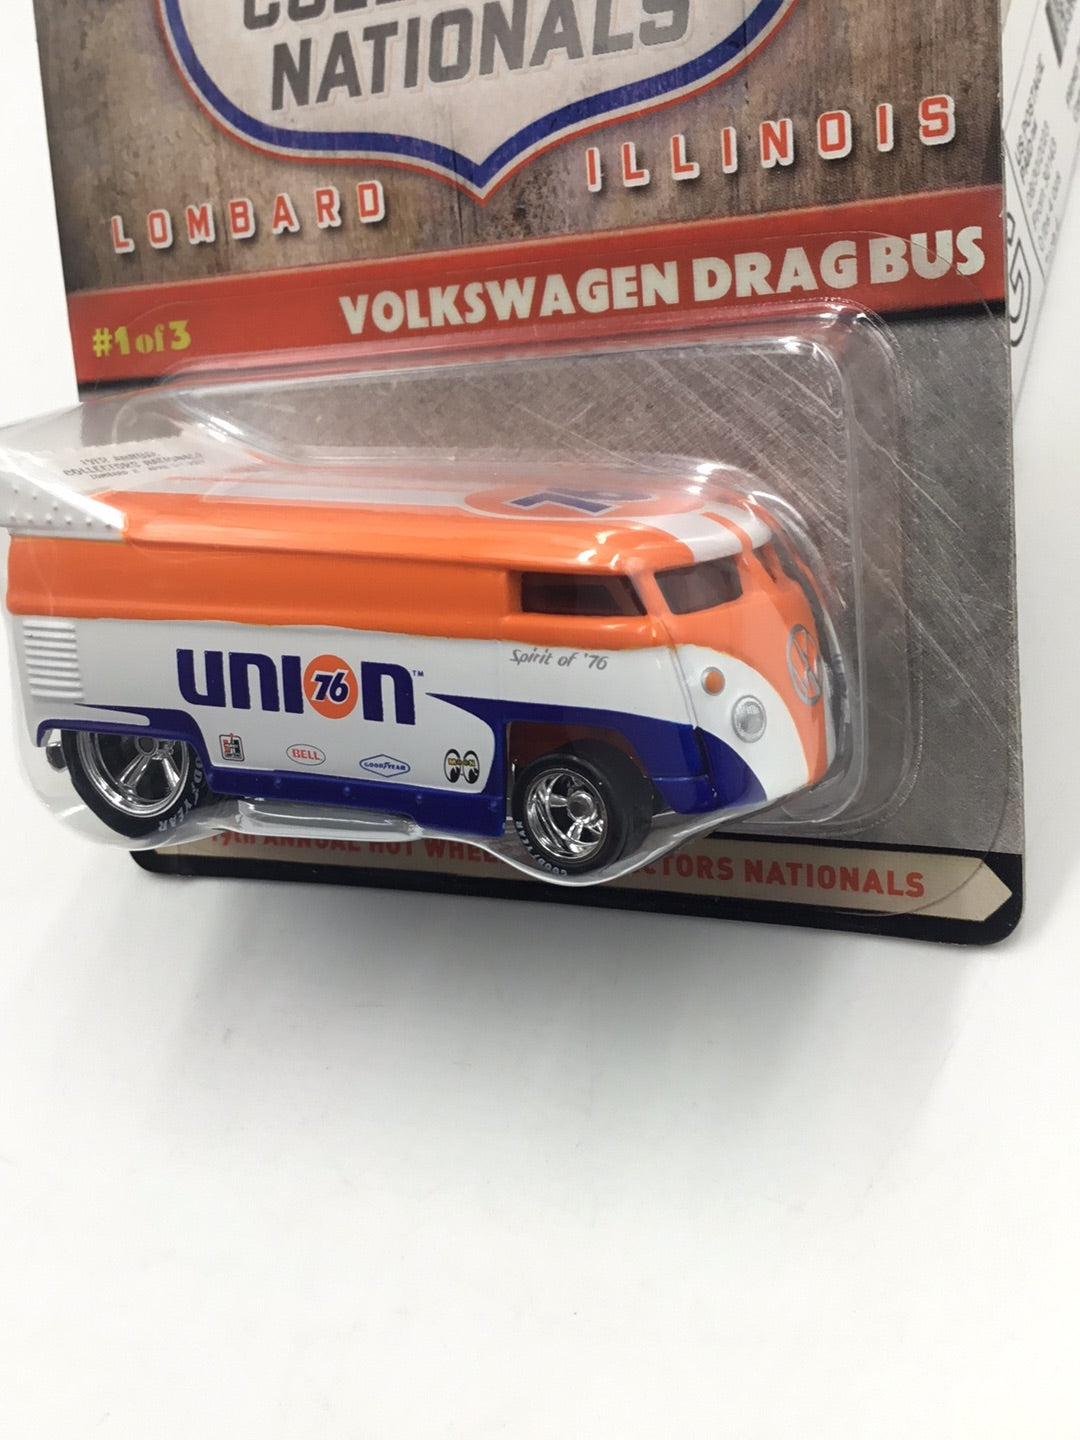 2019 hot wheels 19th annual collectors nationals Volkswagen Drag Bus Convention series 3297/5000 with Protector